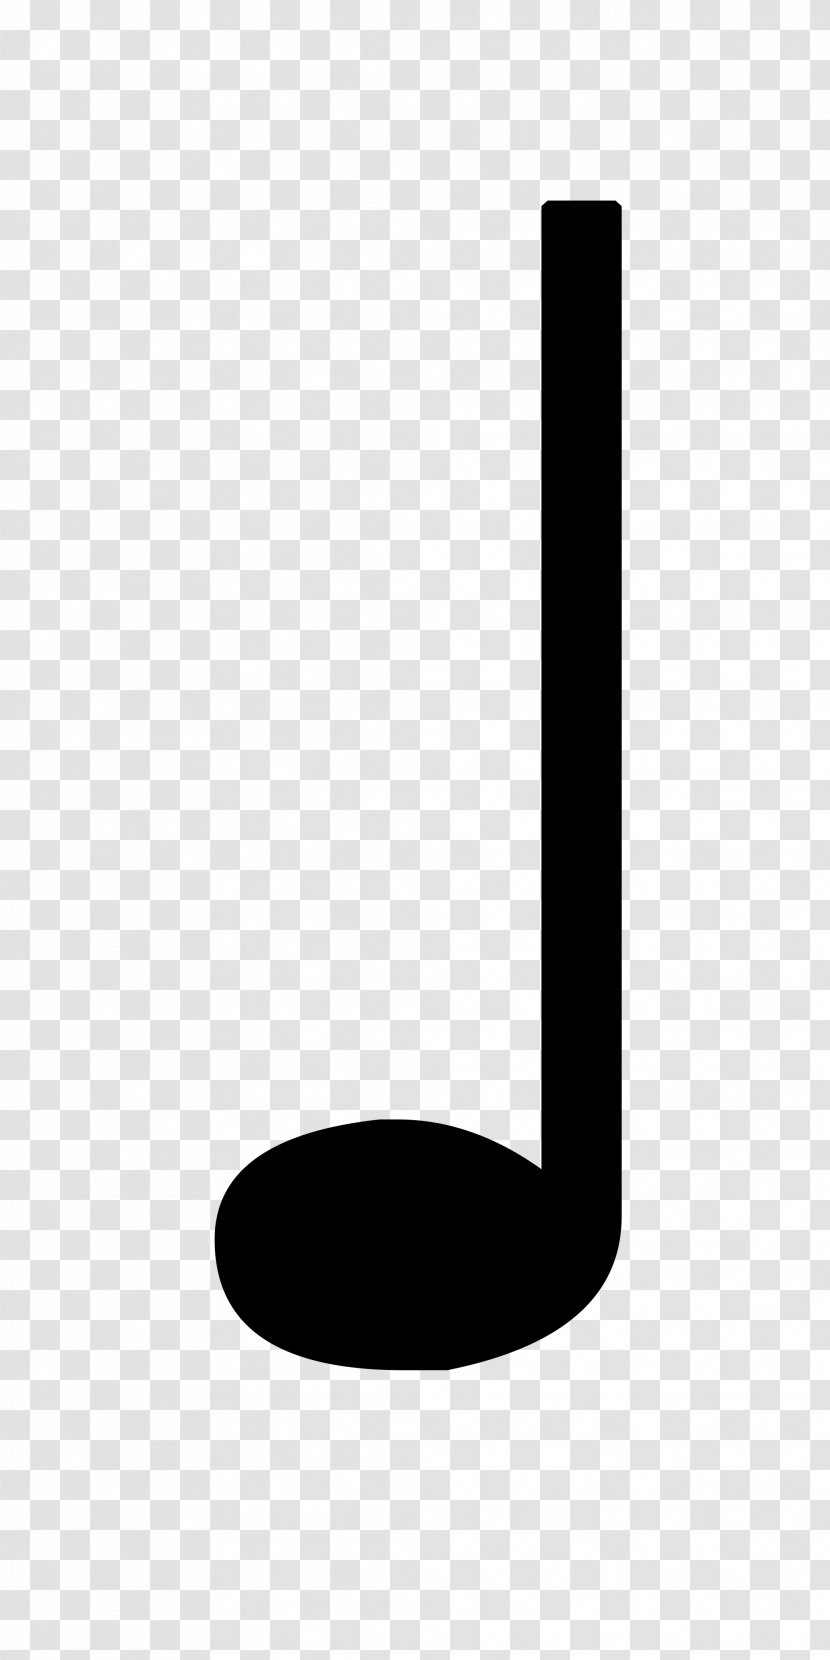 Quarter Note Musical Rest Notation Eighth - Silhouette Transparent PNG